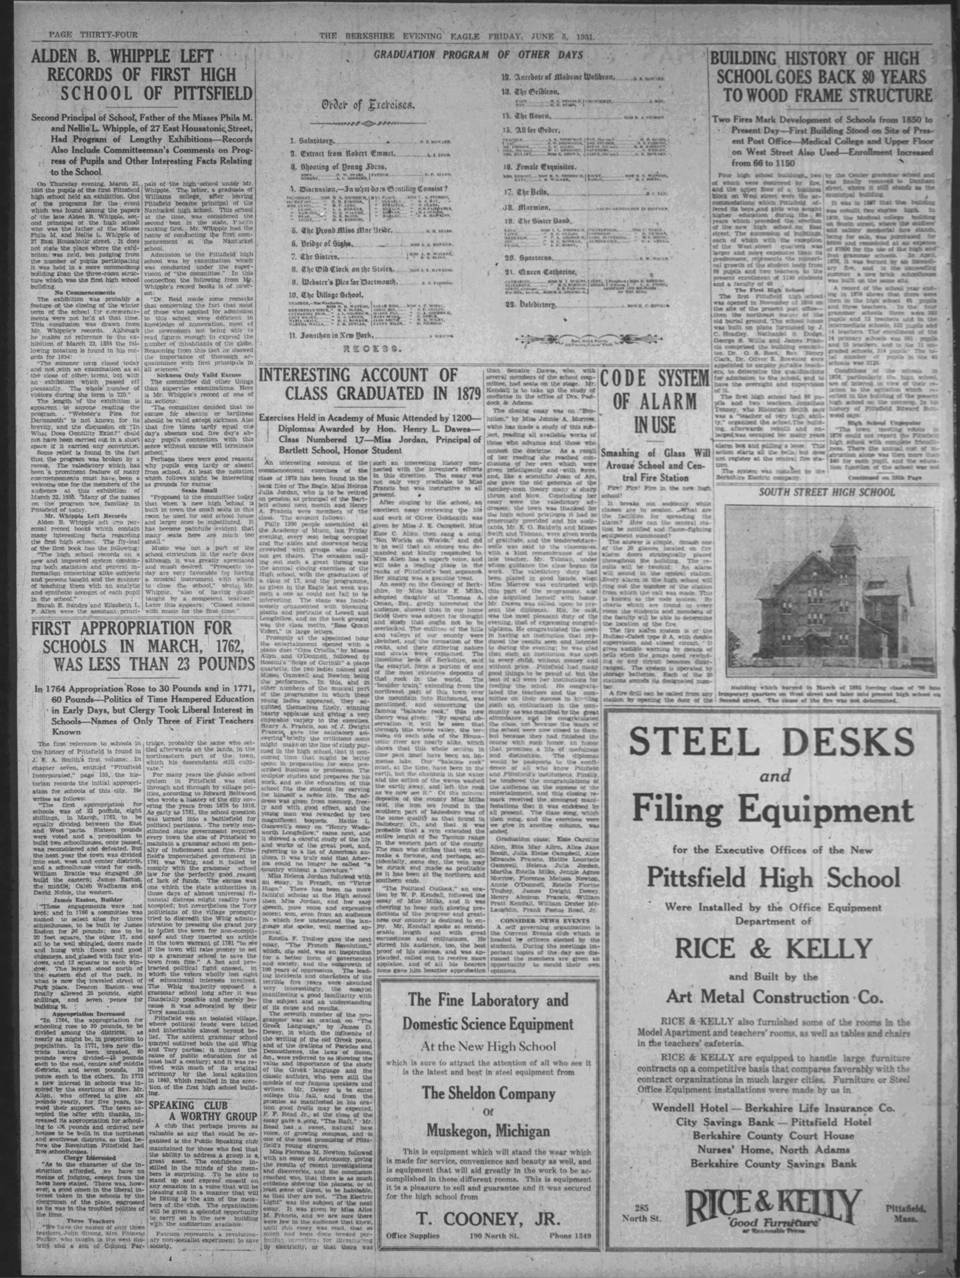 The_Berkshire_Eagle_1931_06_05_page_34.jpg